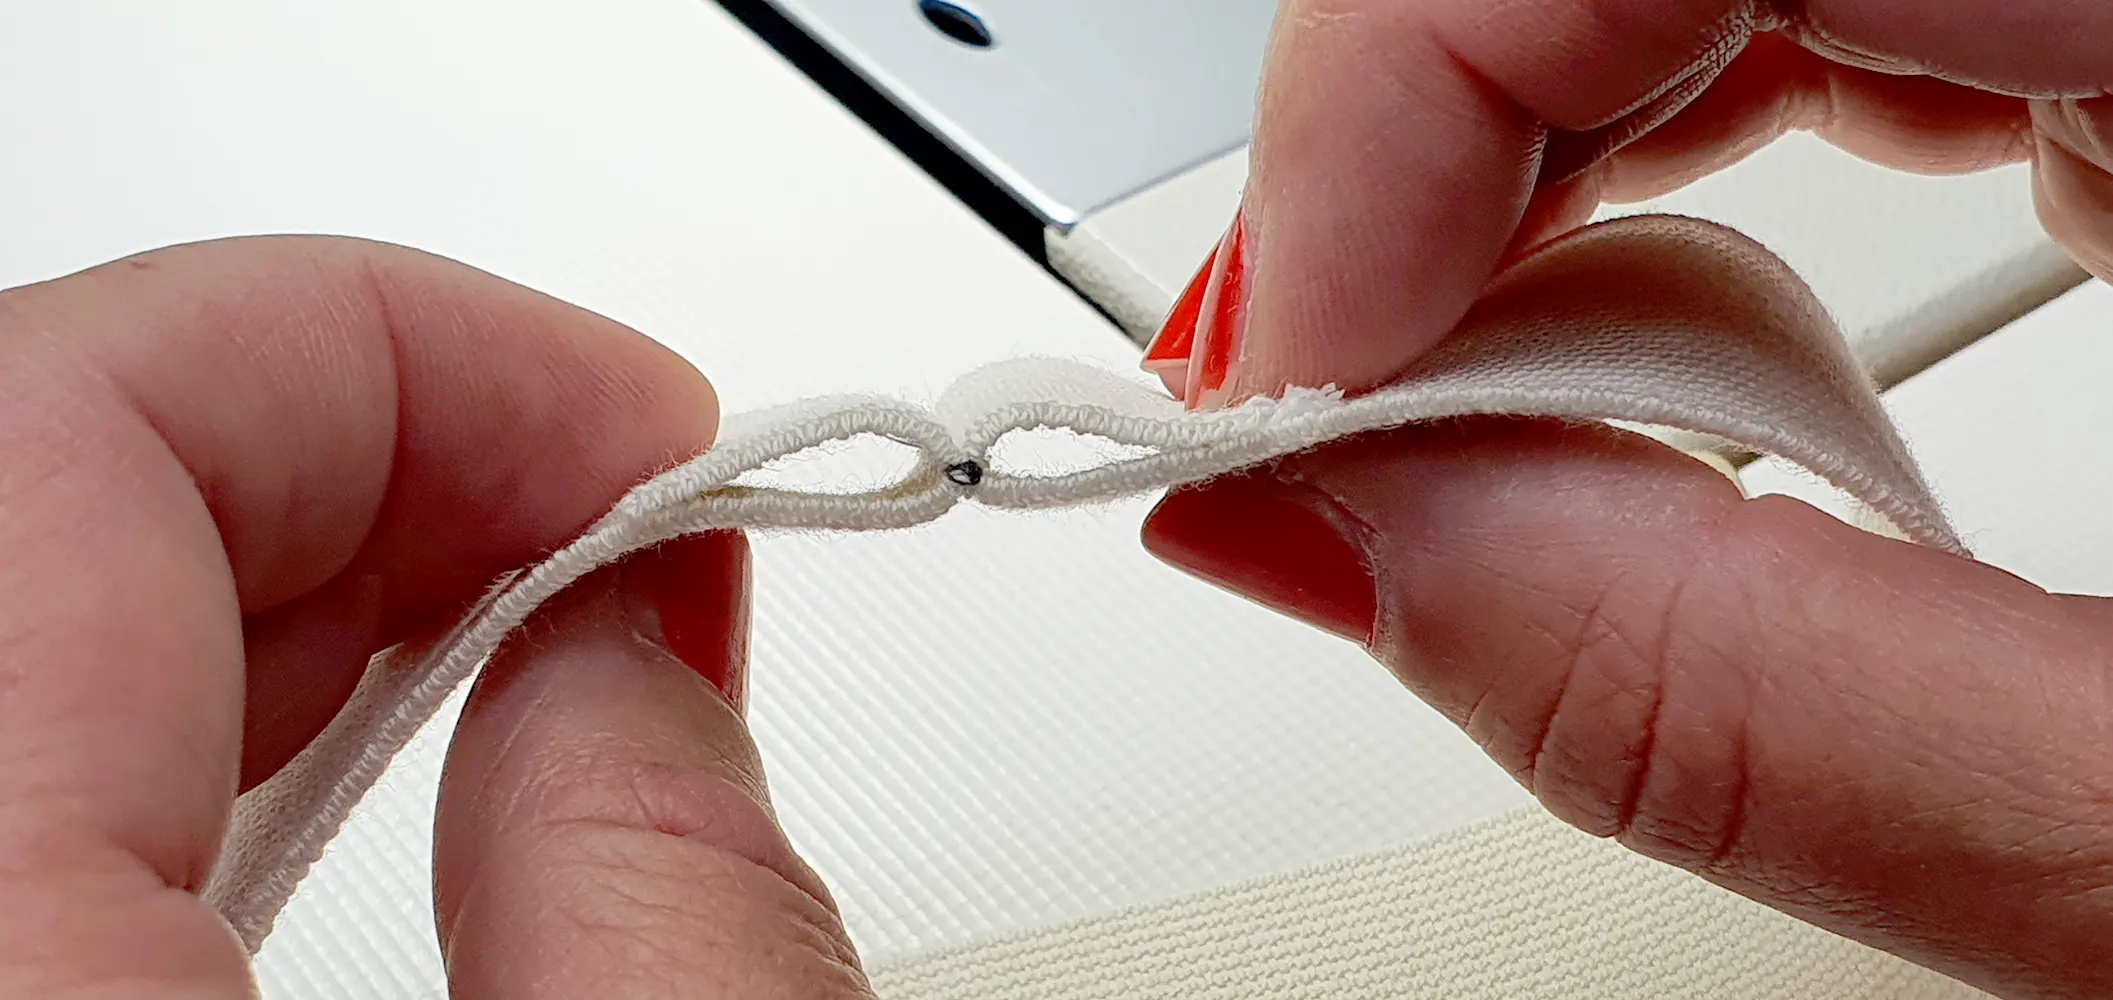 INSTRUCTIONS: Processing an organic elastic band at the waistband